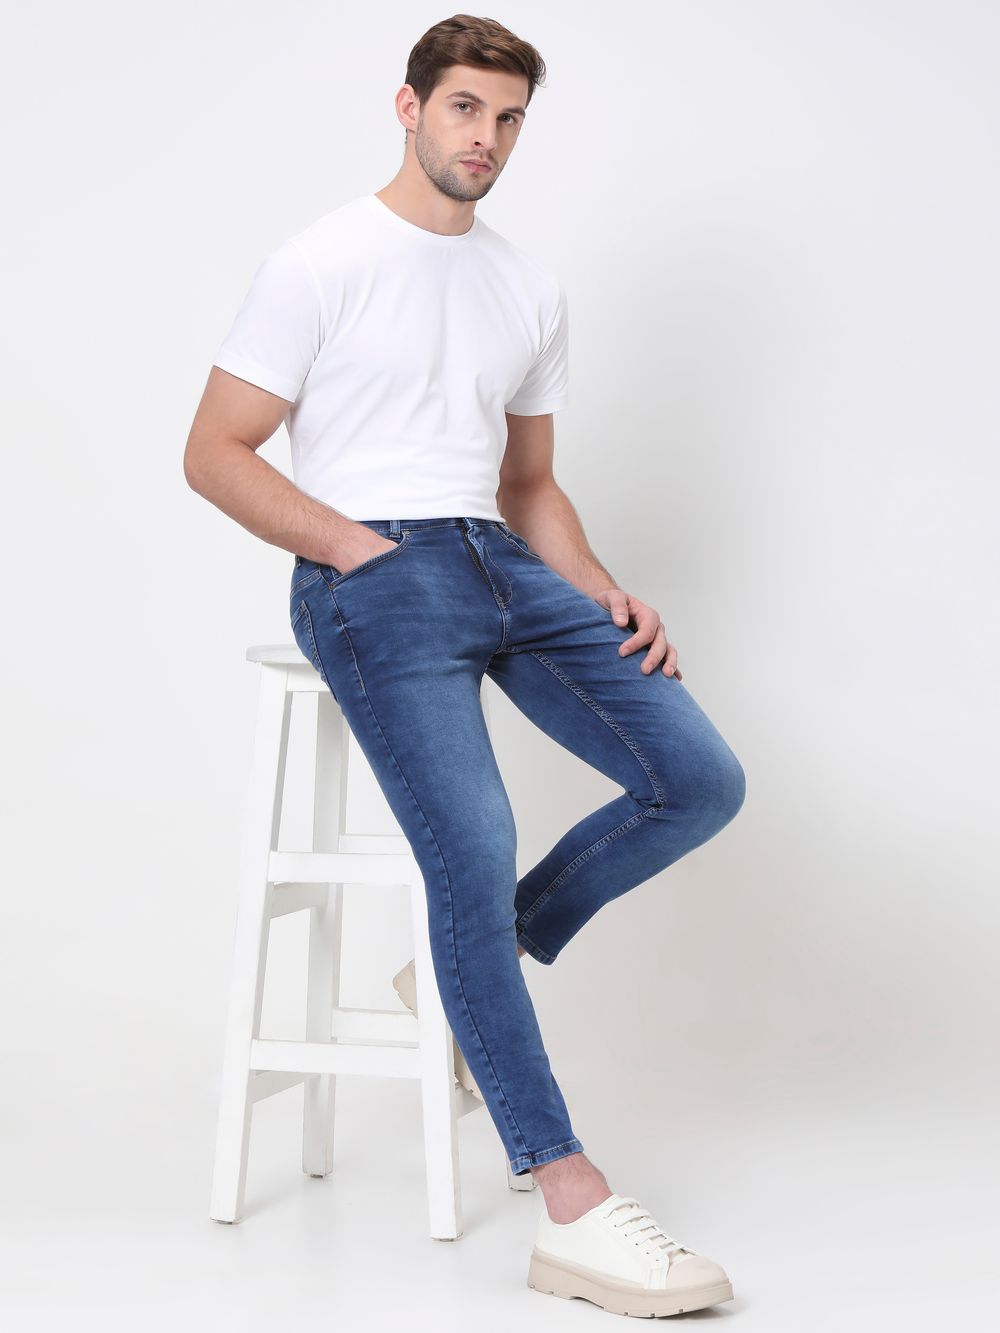 Mid Blue Ankle Length Fly Weight Jeans